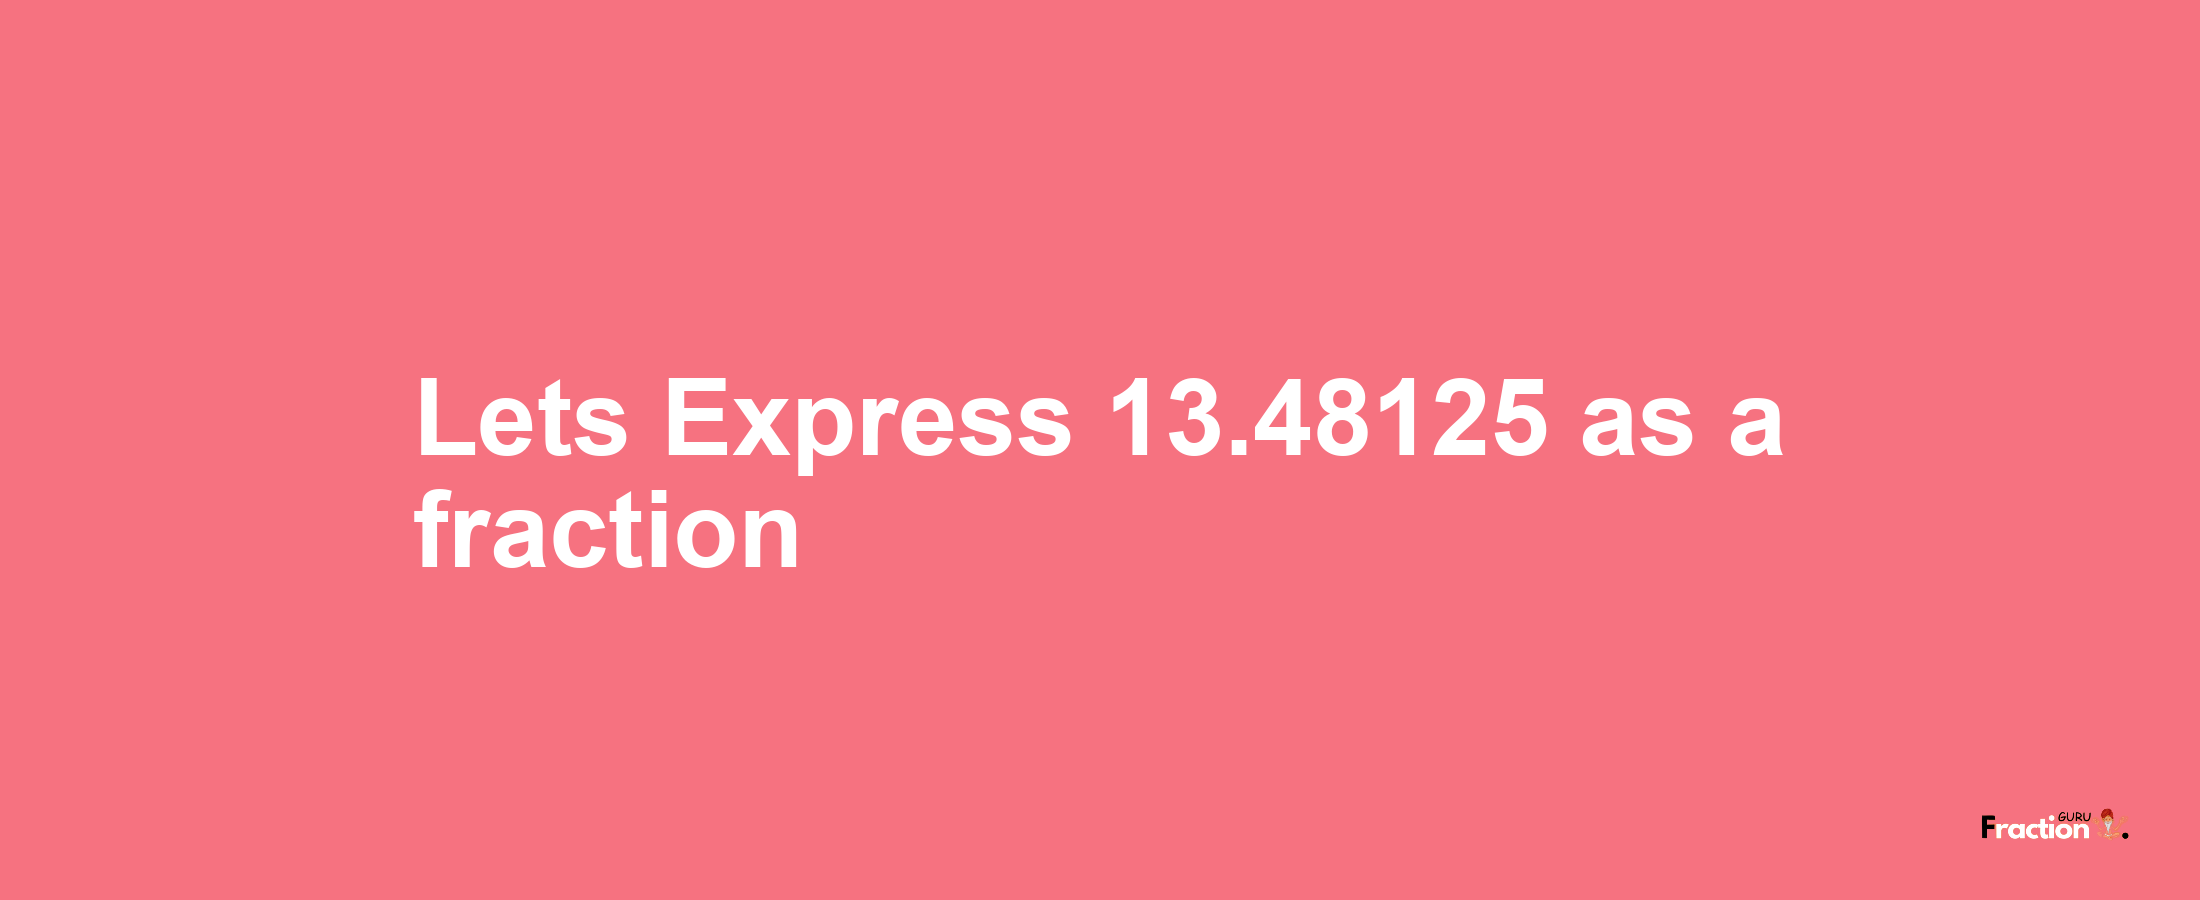 Lets Express 13.48125 as afraction